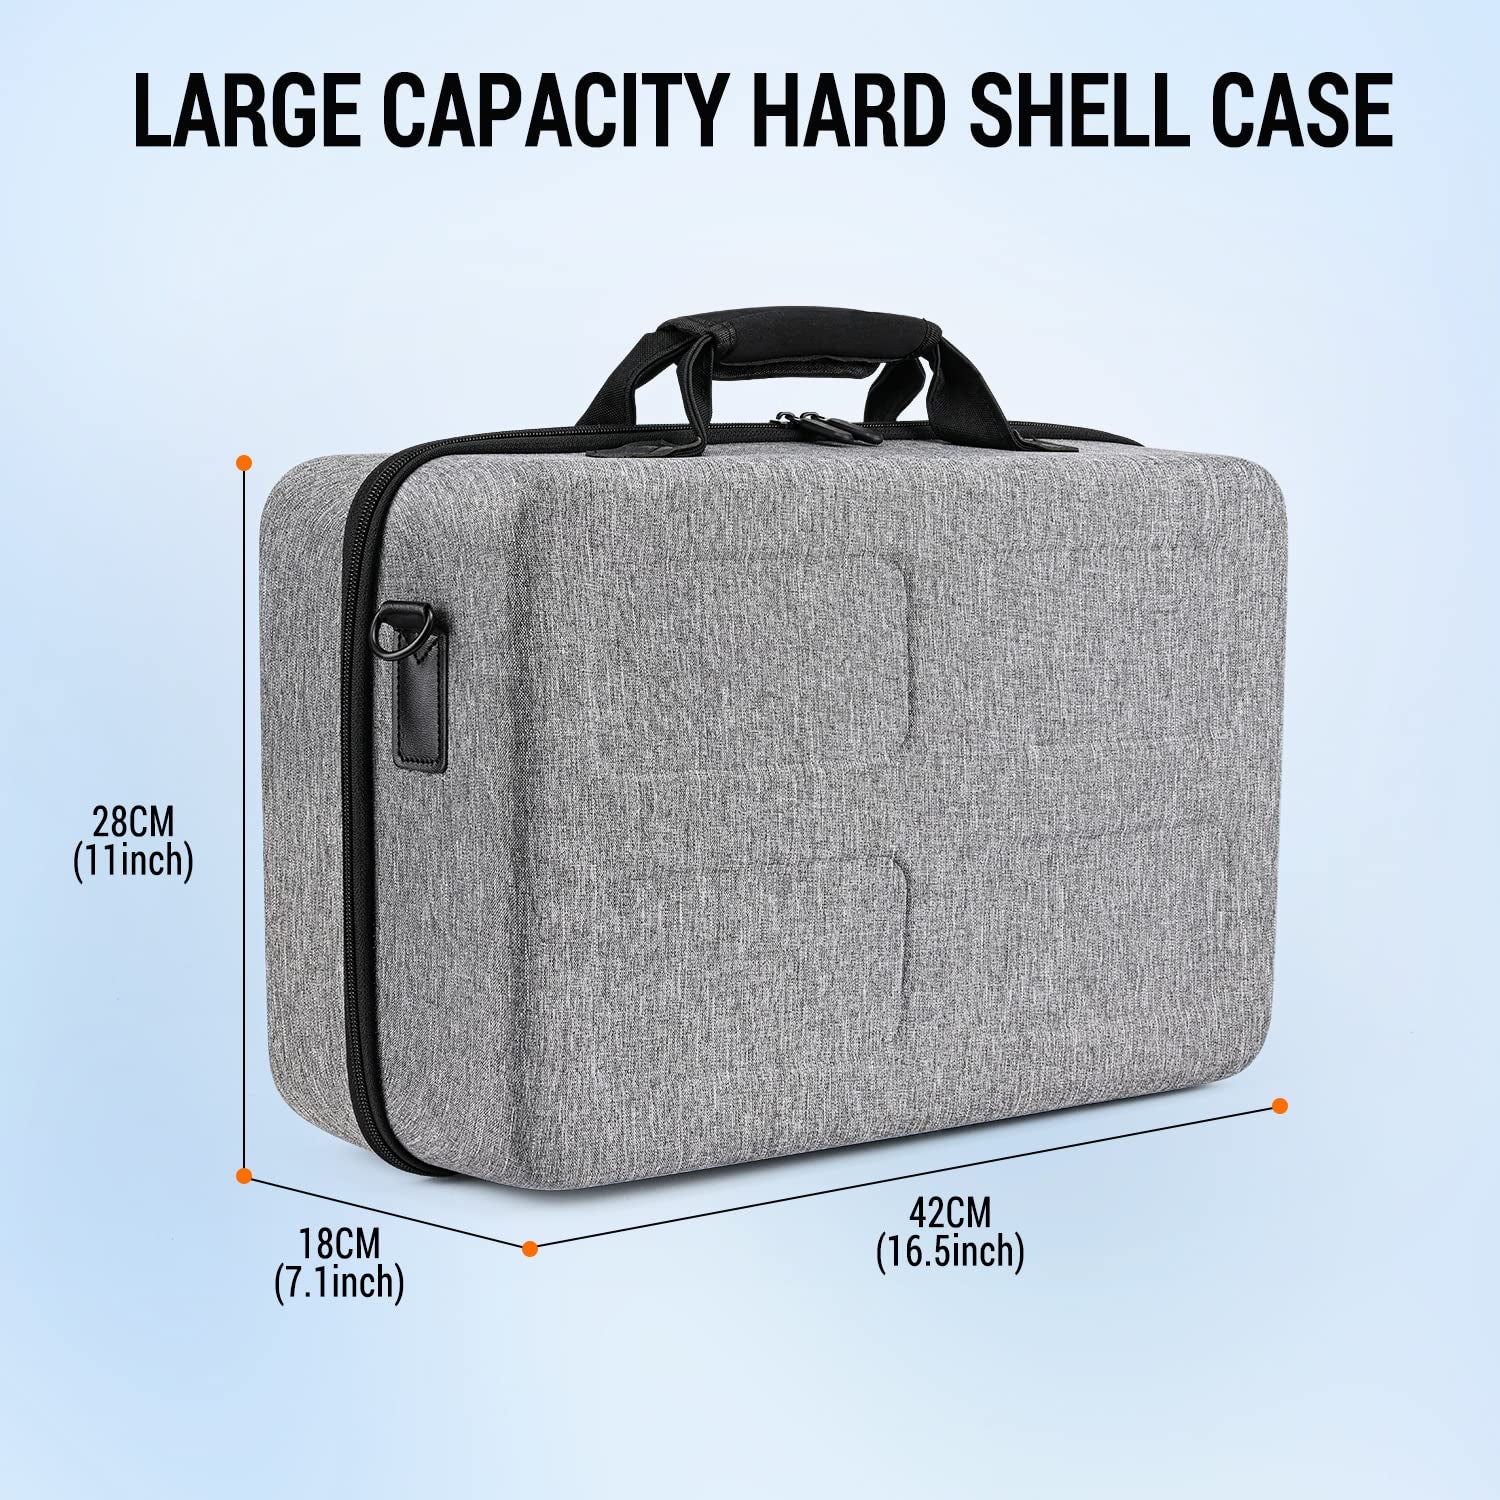 Hard Shell Case for Playstation 5, Controllers, Base and Accessories | Shockproof, Waterproof and Scratchproof